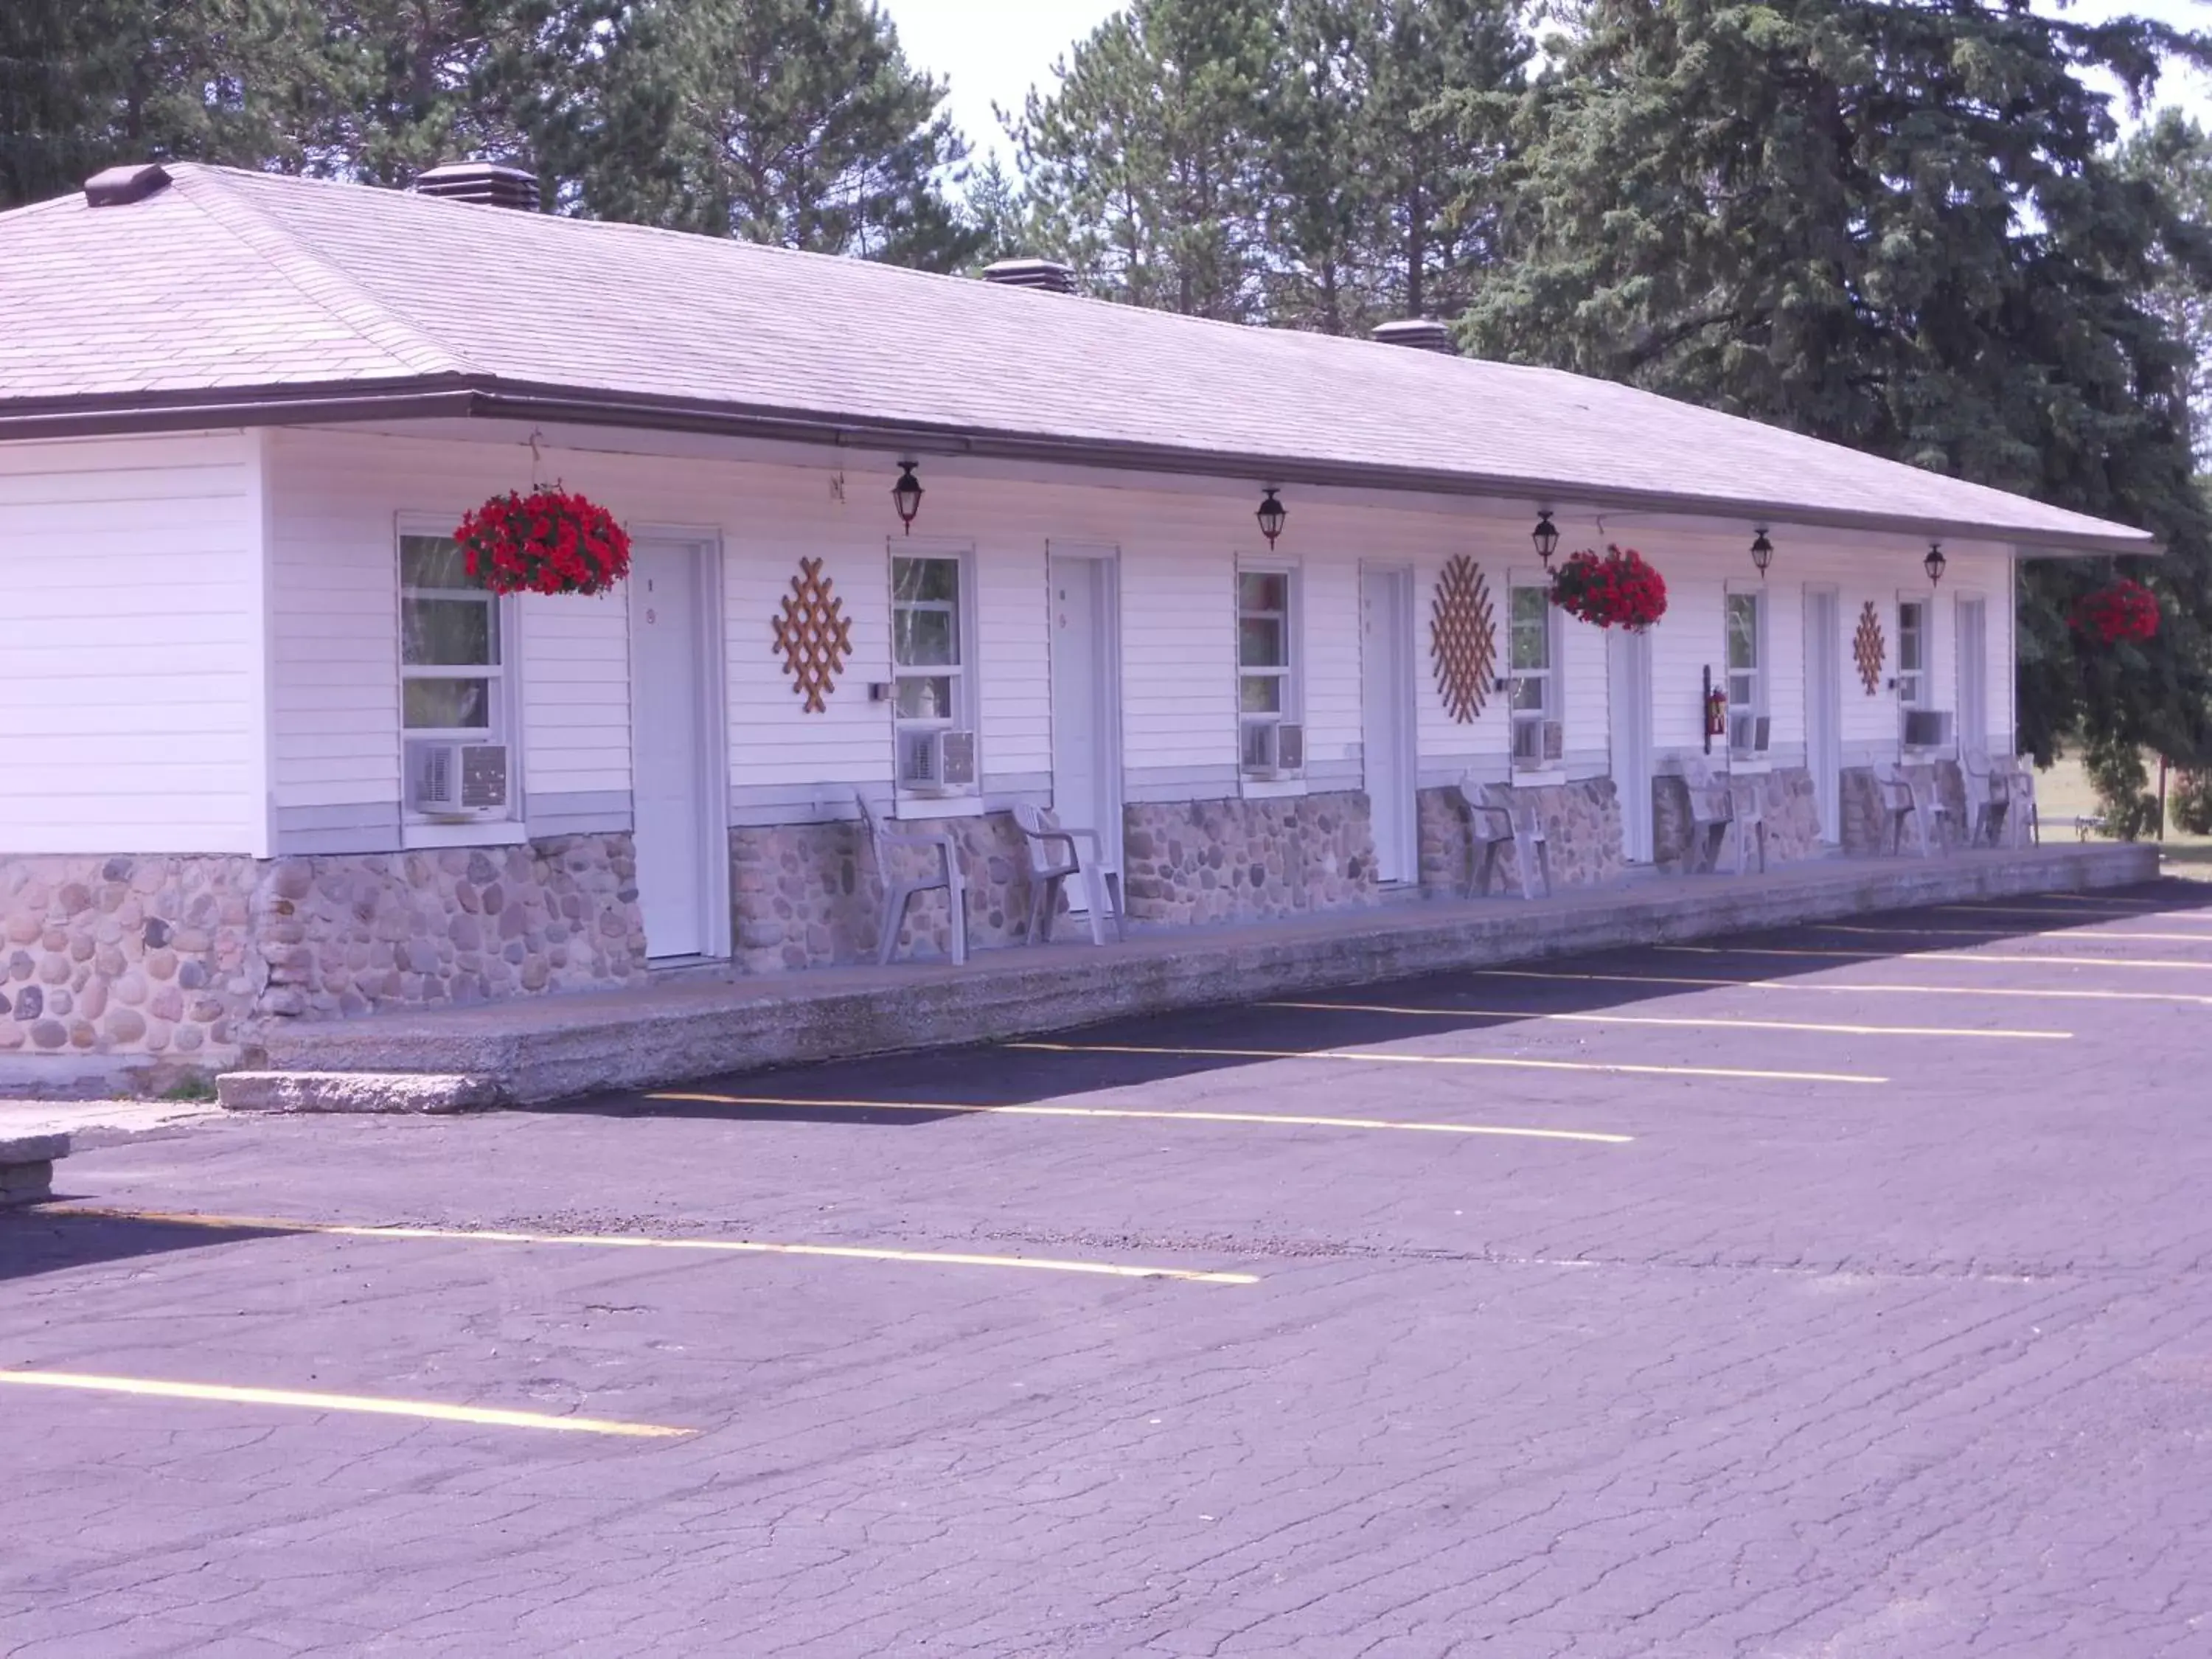 Property Building in Deep River Motel